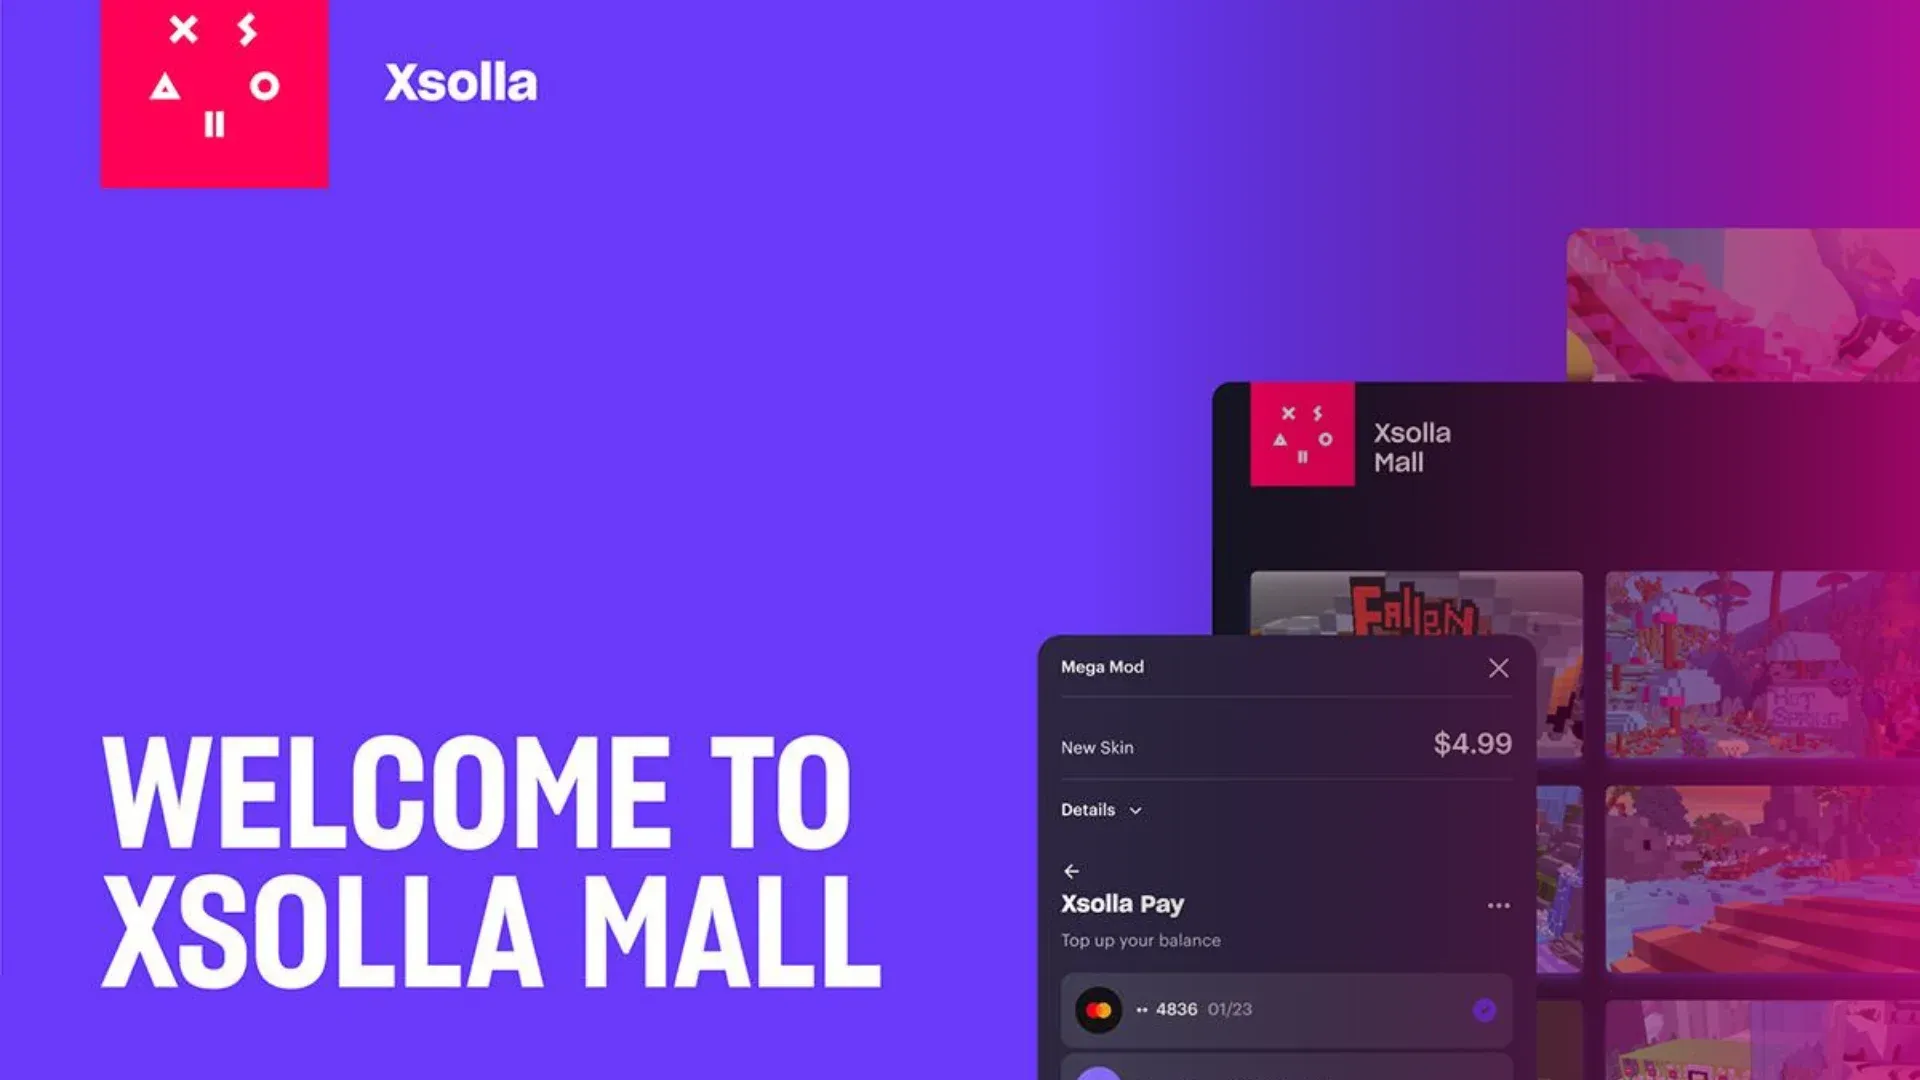 Xsolla Launches Mall, An Online Destination For Video Games